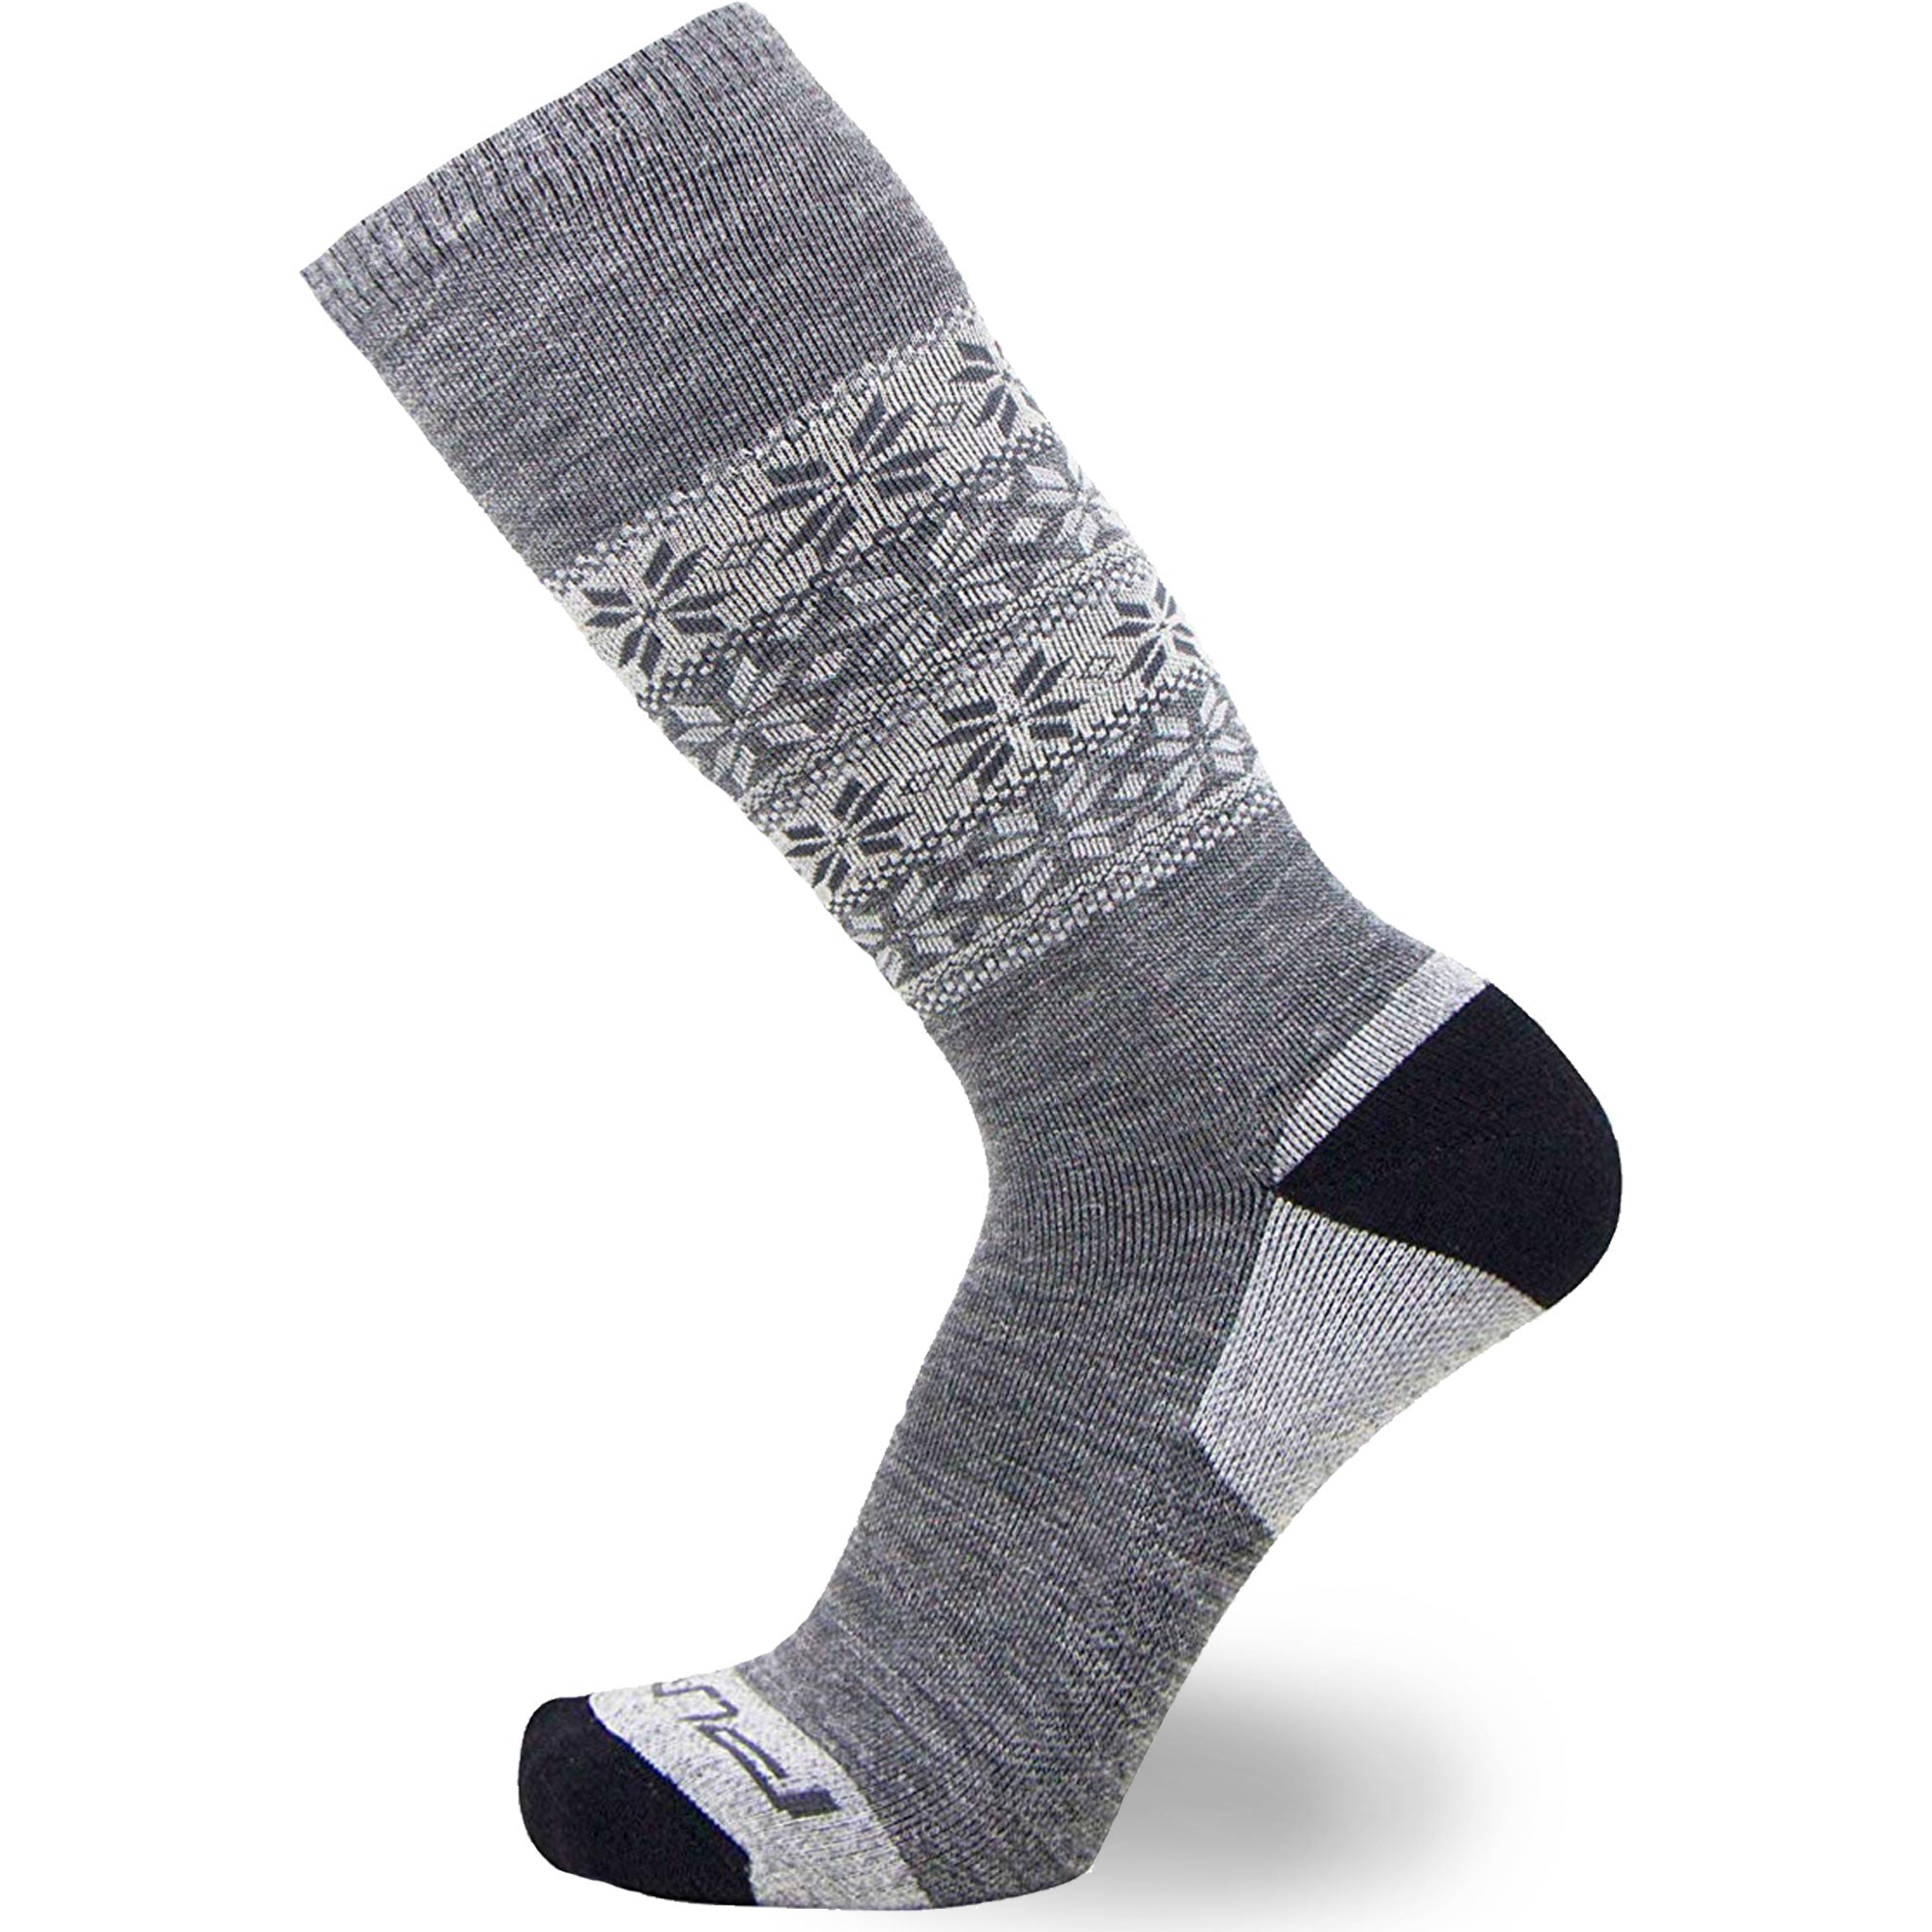 Well Adjusted: The Warming Sock Treatment - Pure Life Clinic